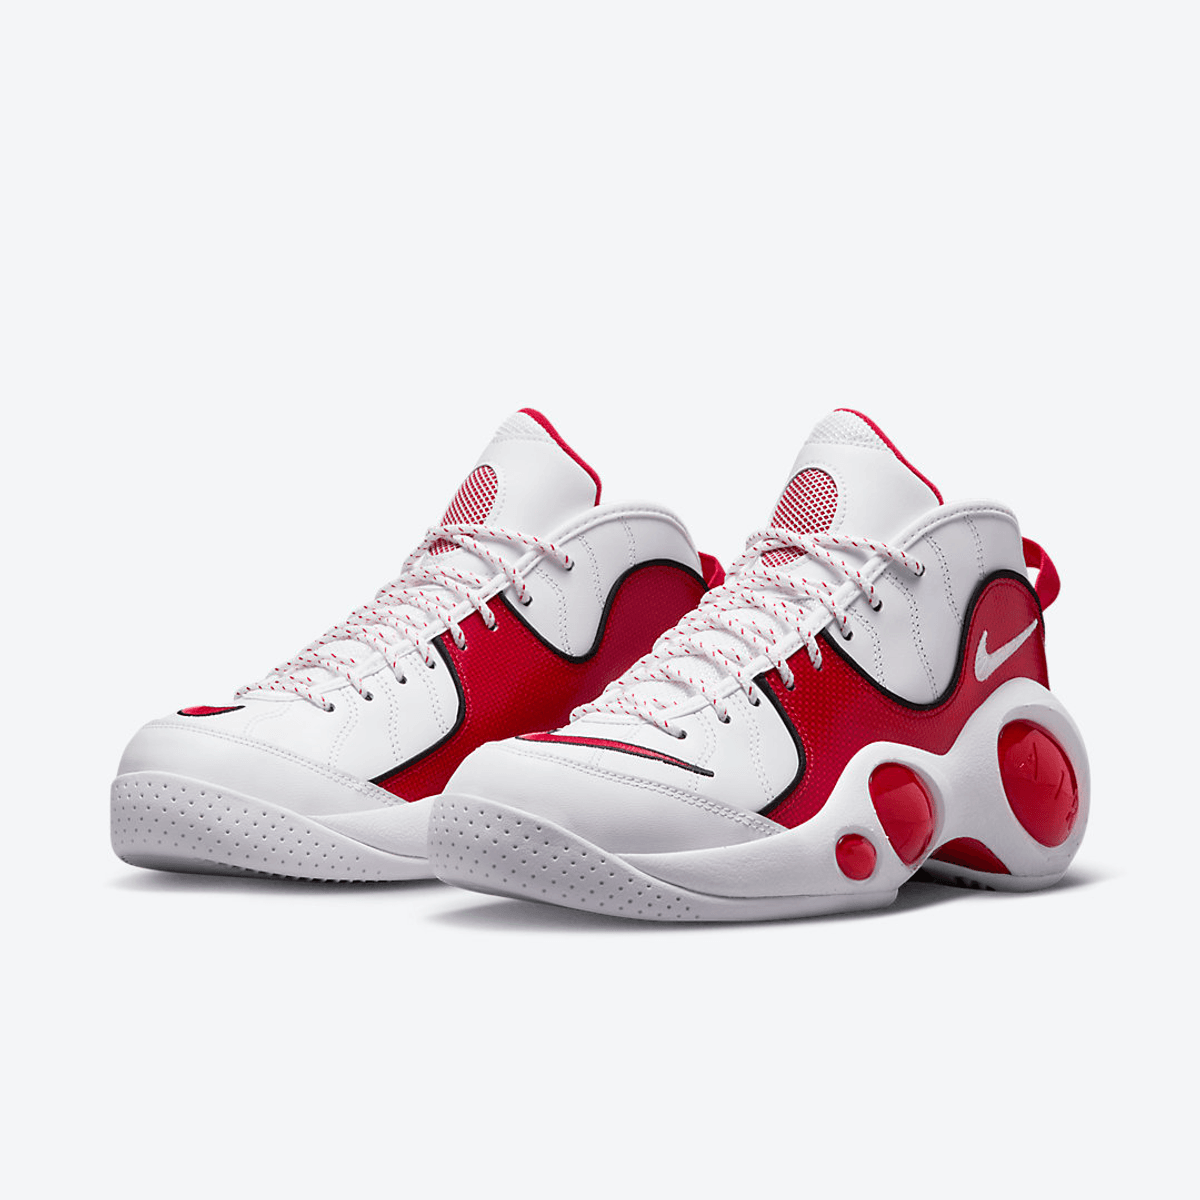 Official Images Of The Nike Air Zoom Flight 95 White Red